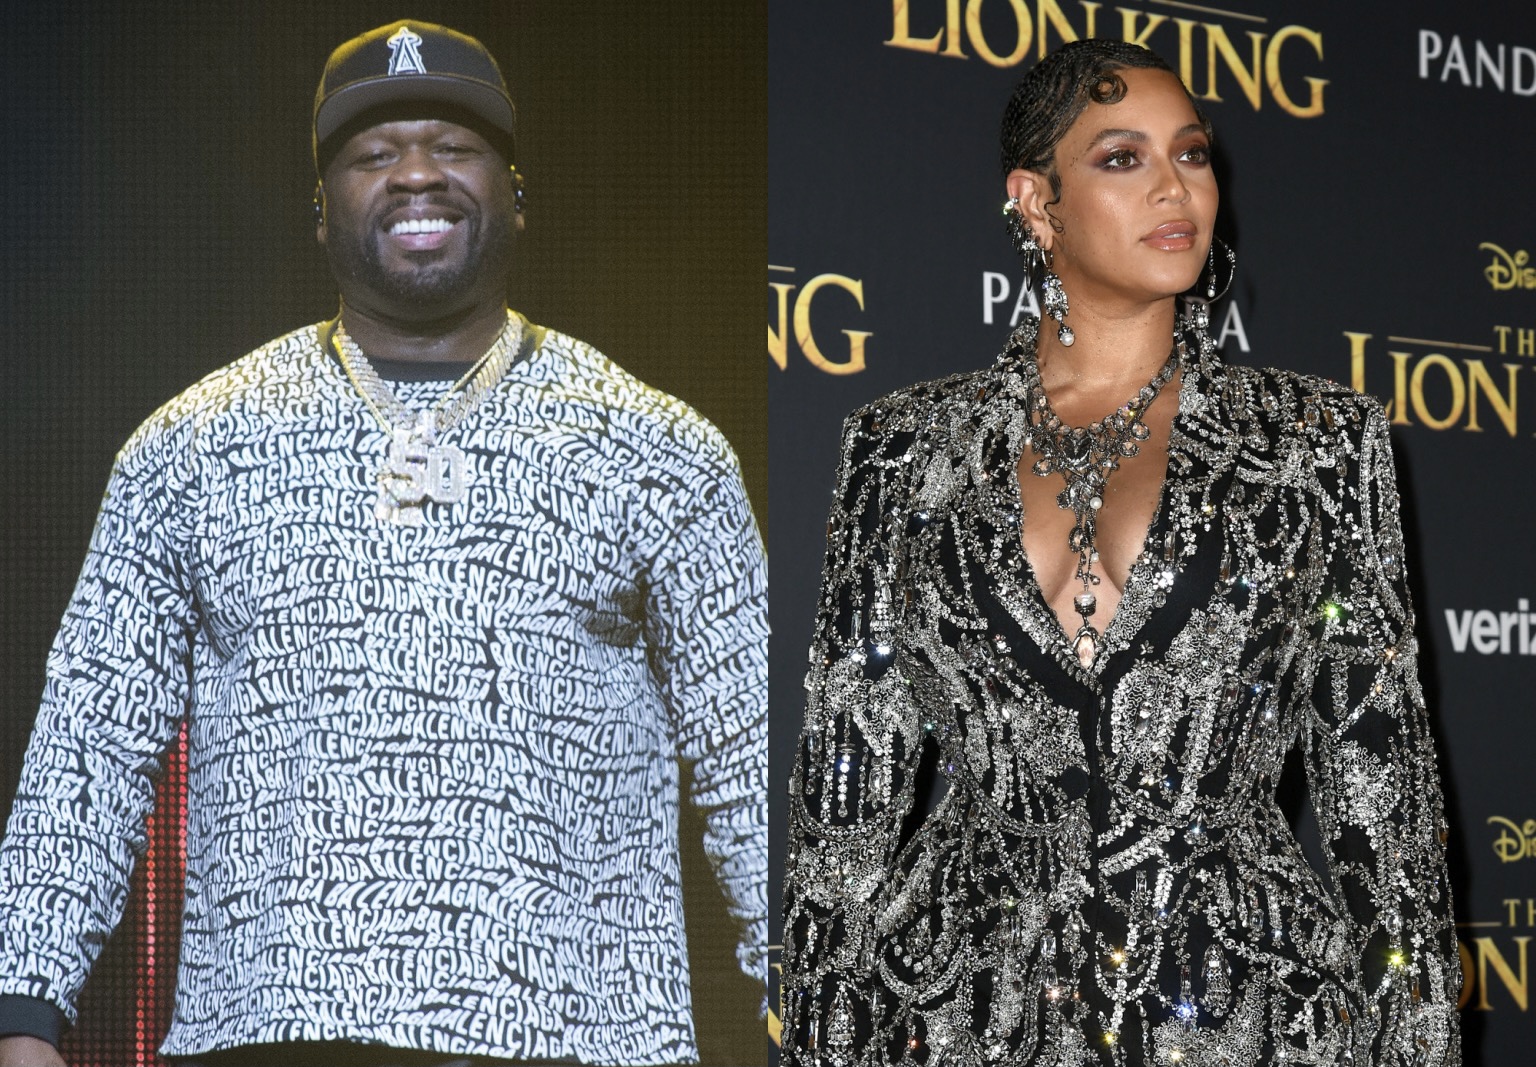 50 Cent Recalls Beyoncé Being Ready To Fight Him During Past Beef With JAY-Z